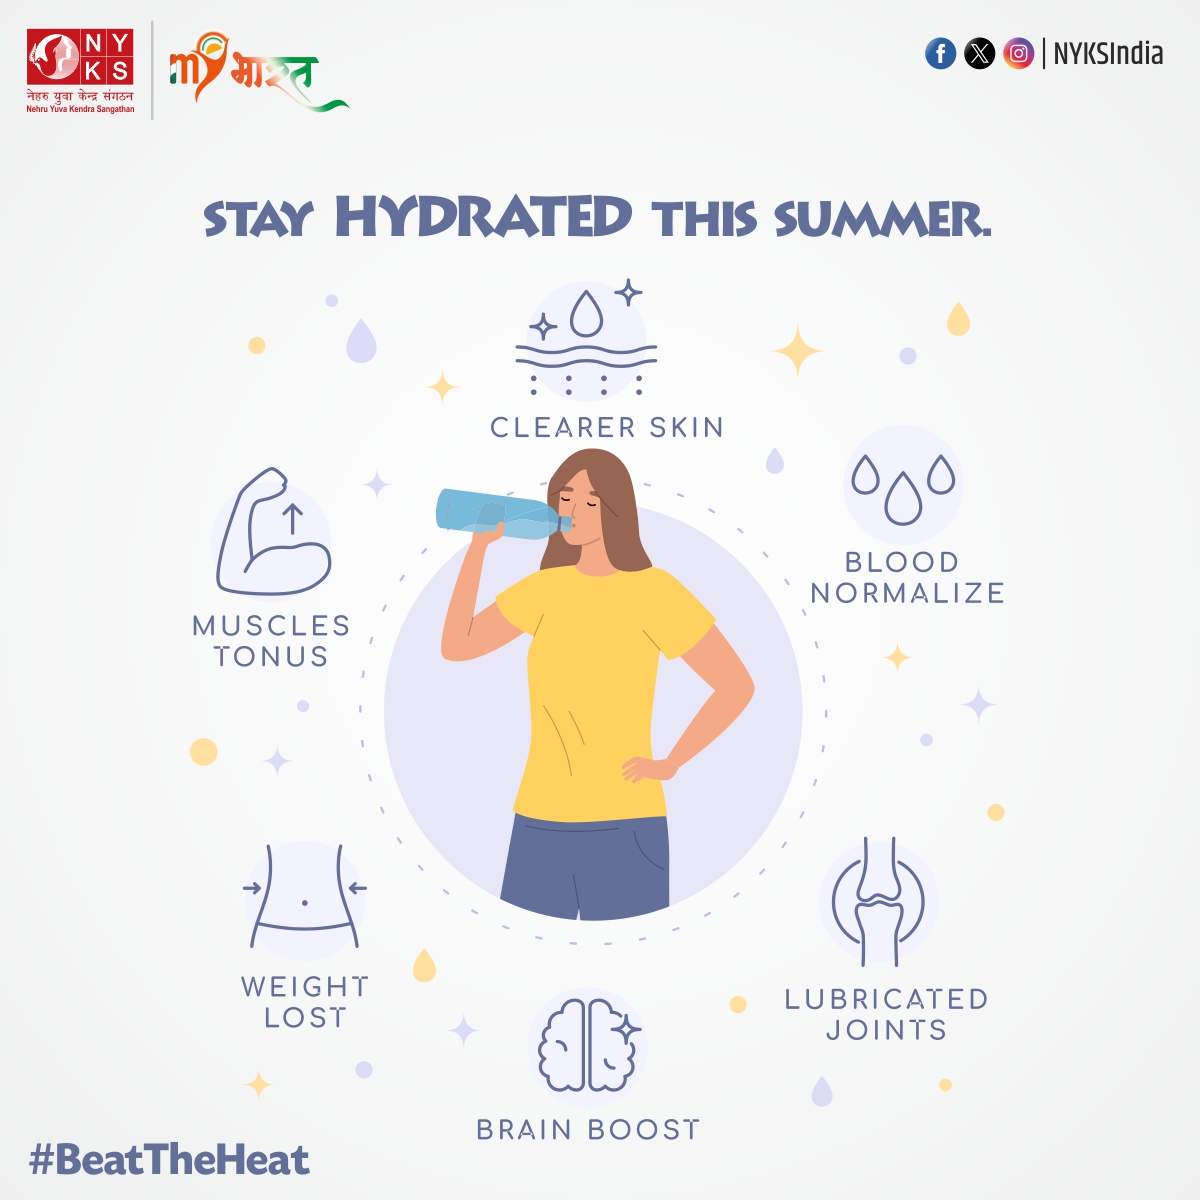 Summer's here! Don't forget to drink plenty of water and keep yourself hydrated. Stay cool, stay healthy! 💦☀️ 

#HydrationStation #SummerVibes #BeatTheHeat #NYKS